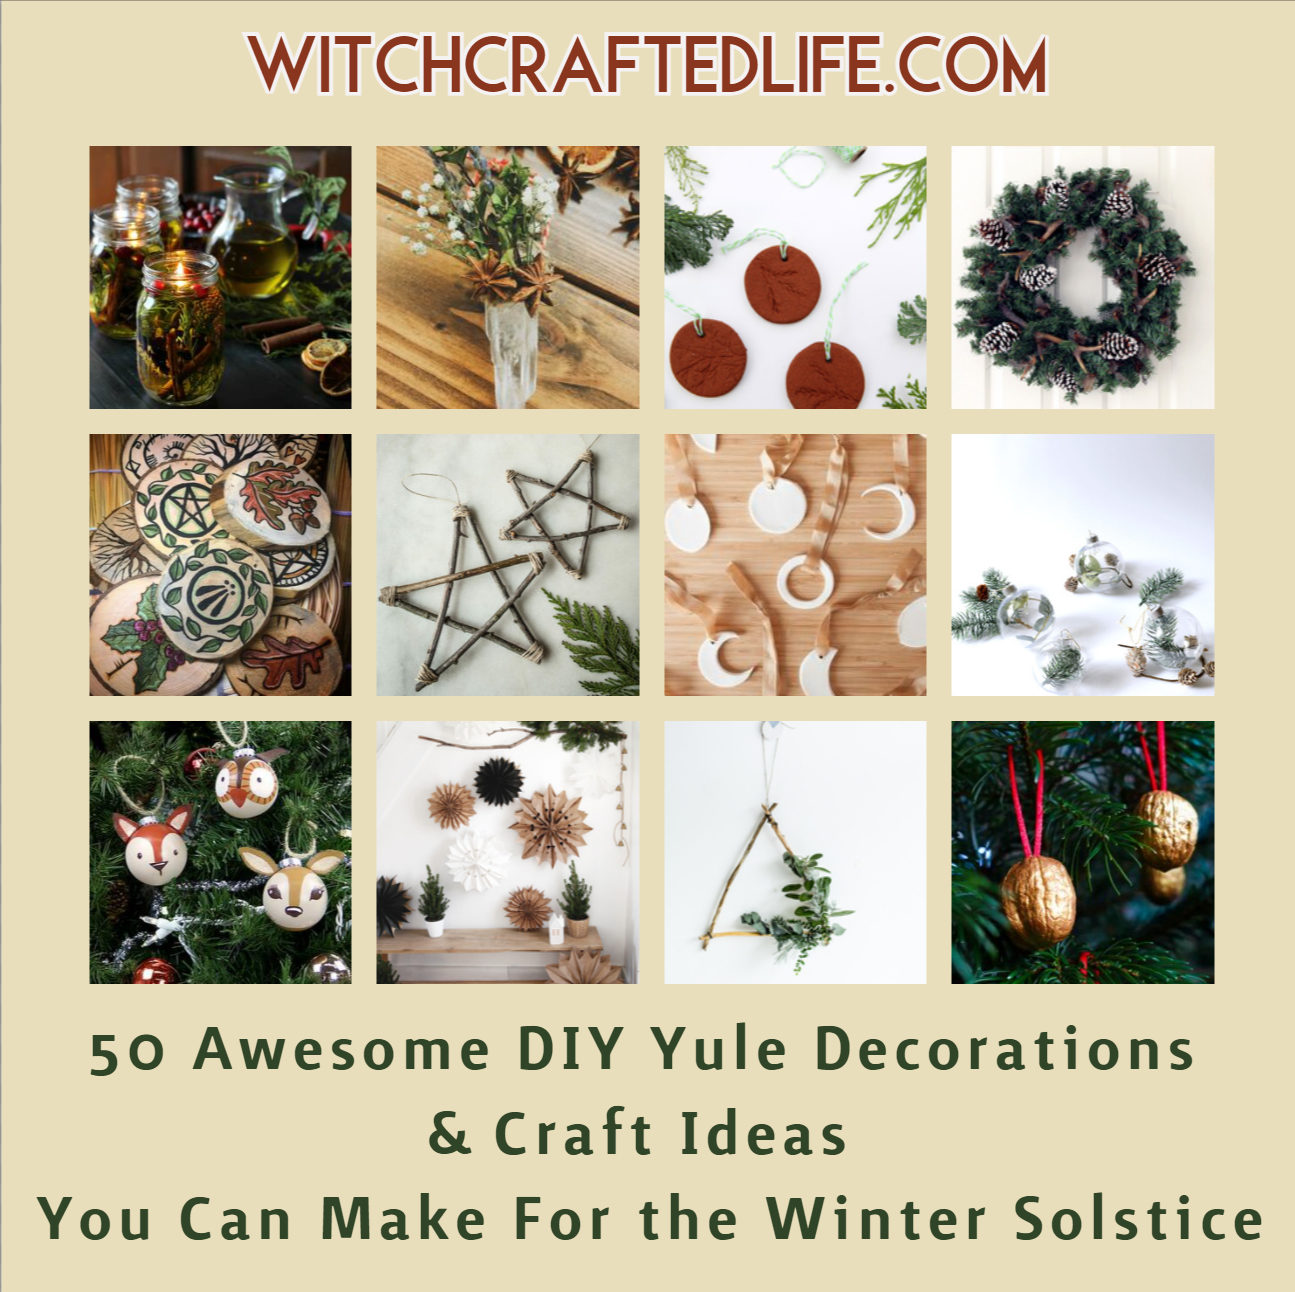 Scandinavian Christmas Decorations to Warm Your Soul